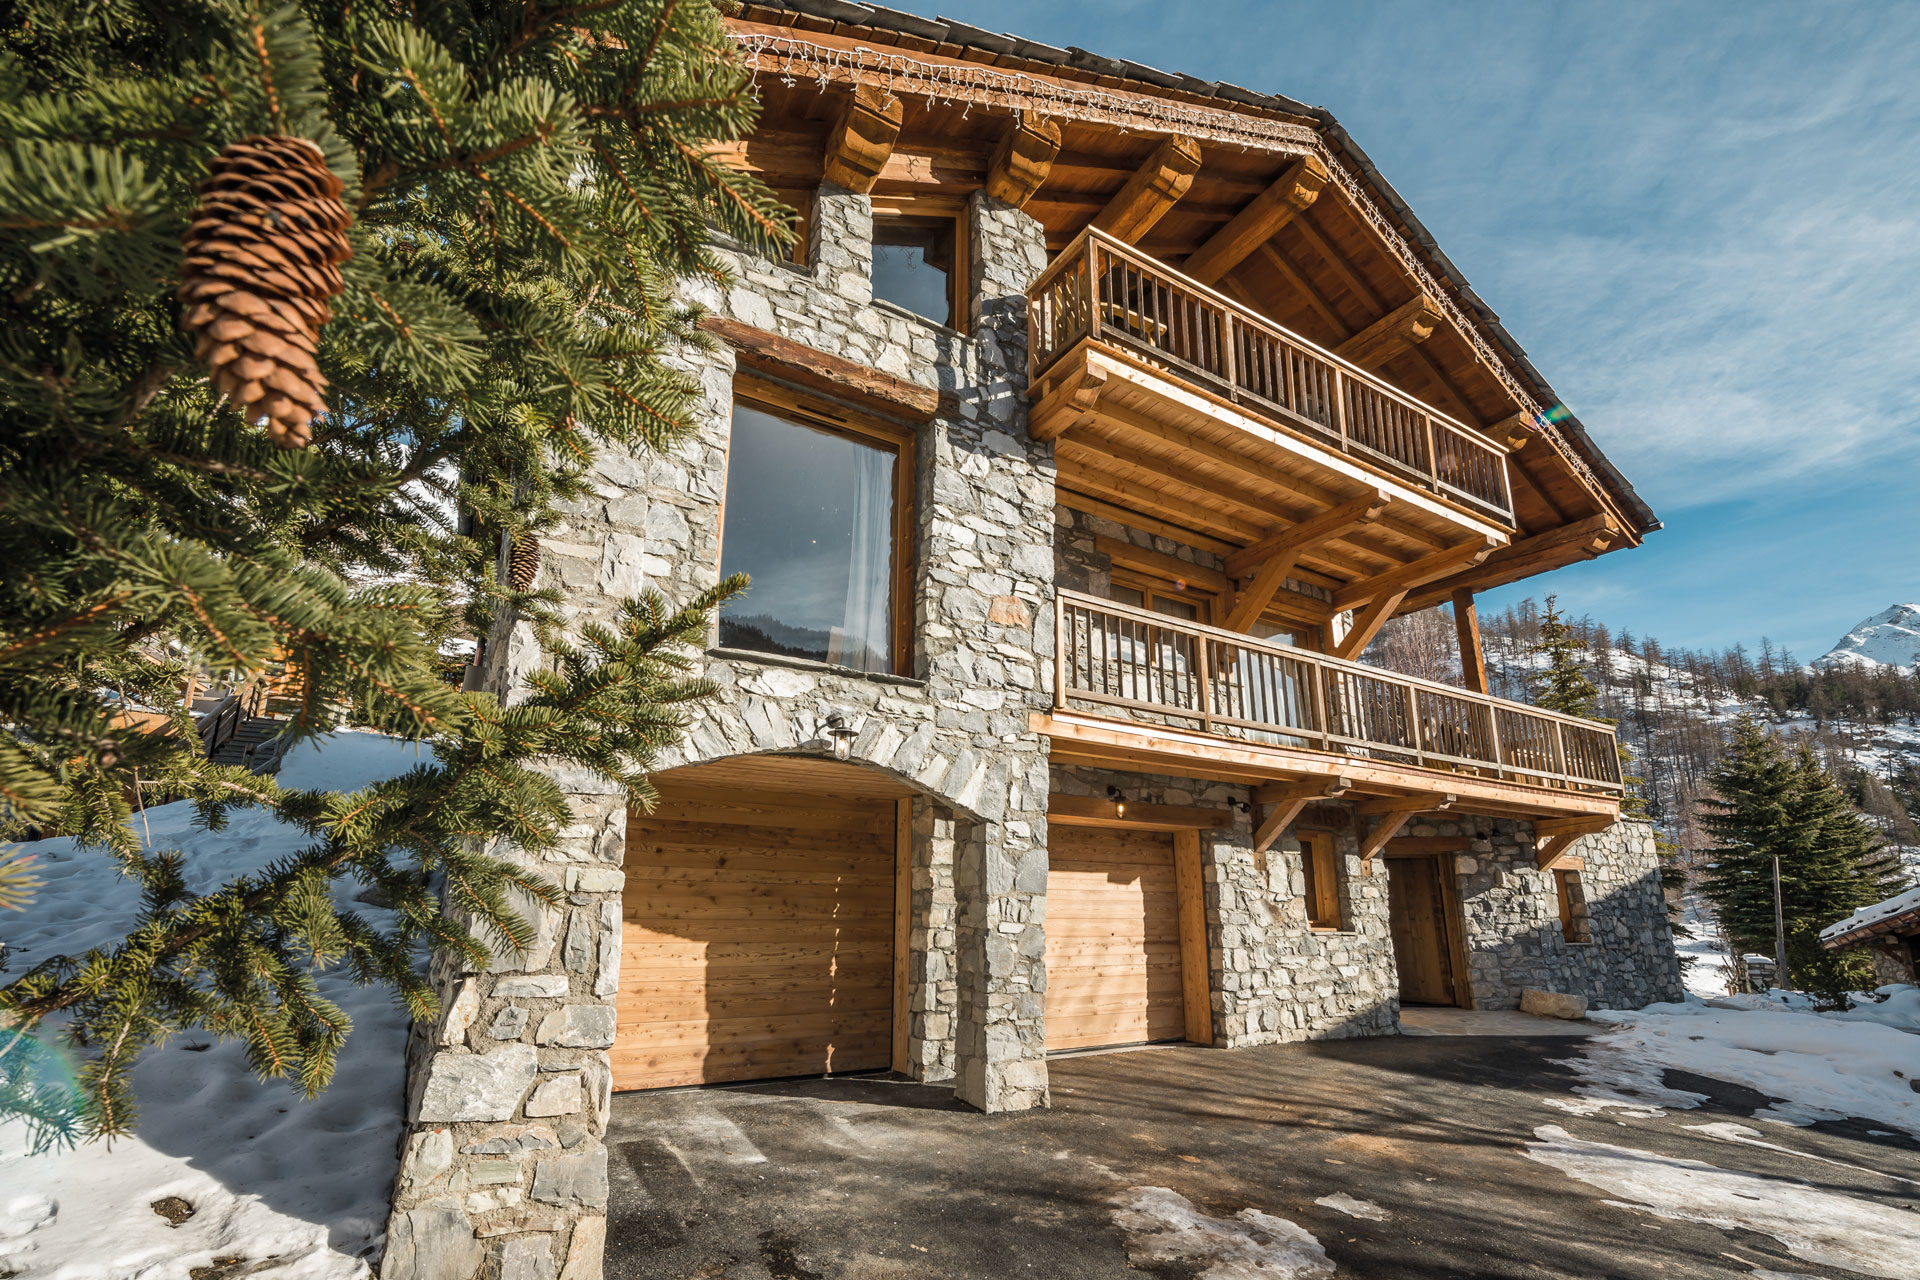 Chalet Blackcomb;s exterior - it is three stories tall with balconies on the first and second floor, with stone pillars framing the garage